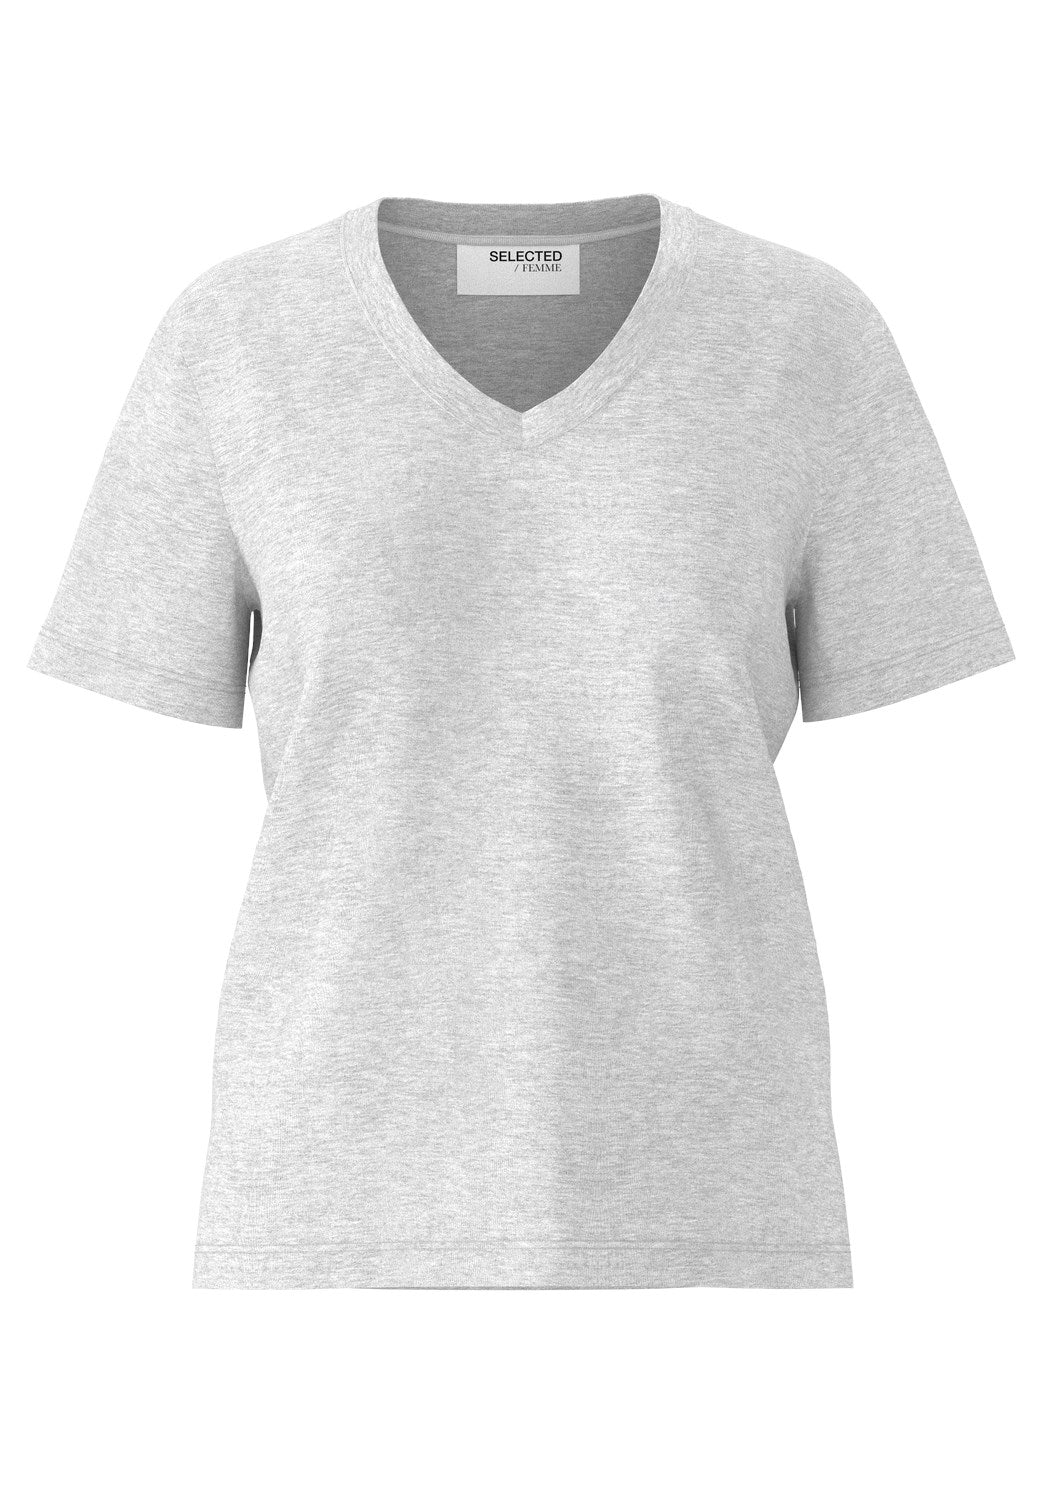 SLFESSENTIAL SS V-NECK TEE